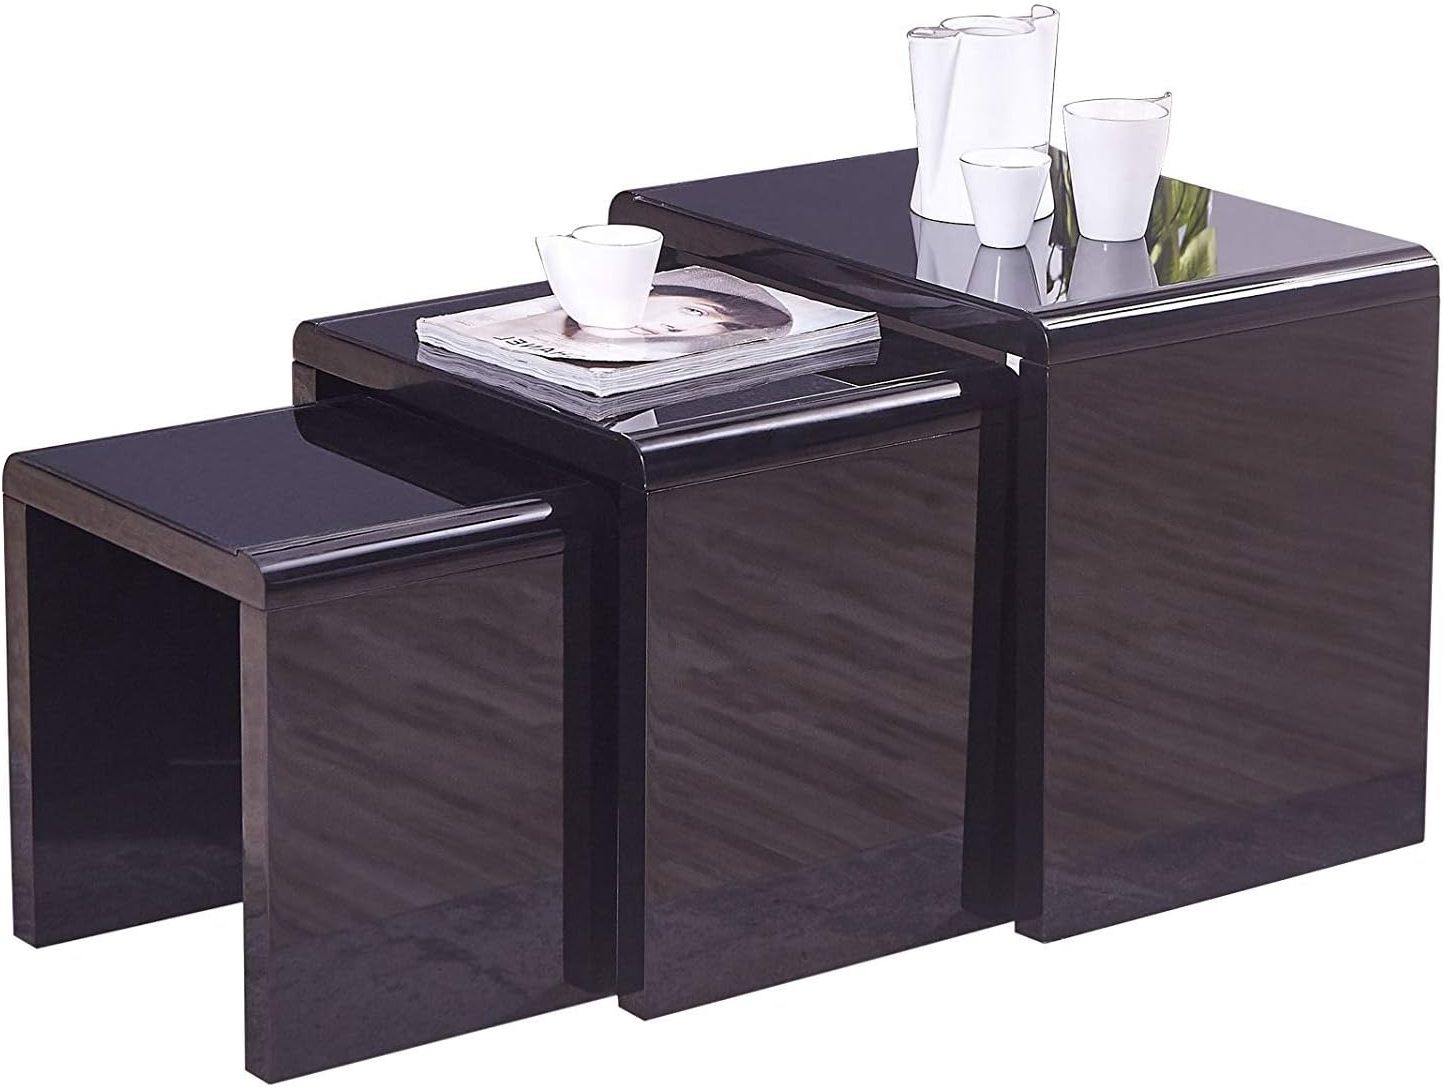 Most Popular Mecor Nest Of 3 Tables High Gloss Nesting Tables Wood Coffee Table In Coffee Tables Of 3 Nesting Tables (View 3 of 15)